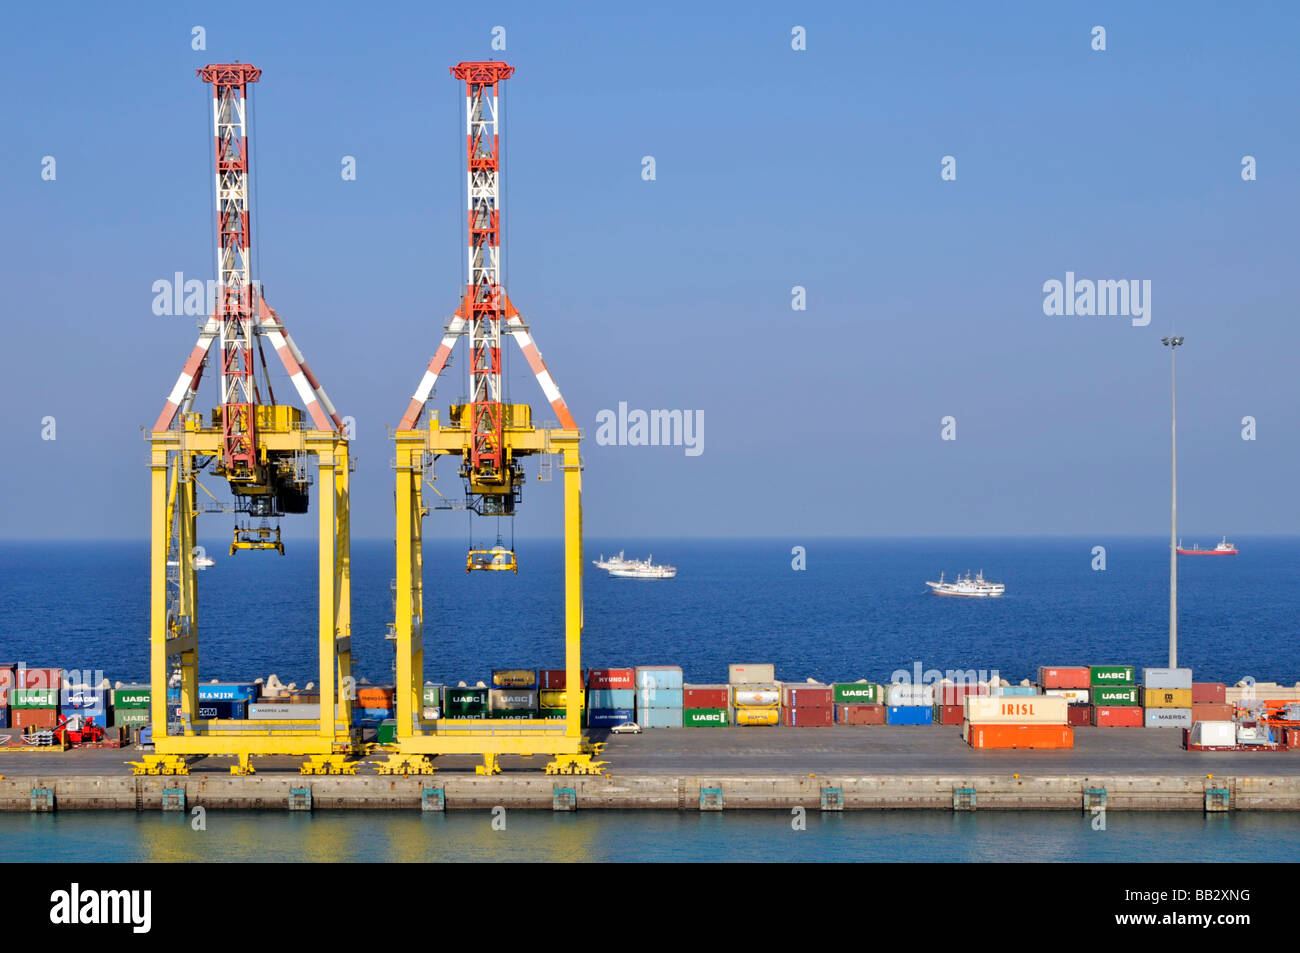 Shipping container port at Muscat Port Sultan Qaboos Muttrah in Oman containers stacked on quay with shipping in the Gulf of Oman in the Middle East Stock Photo